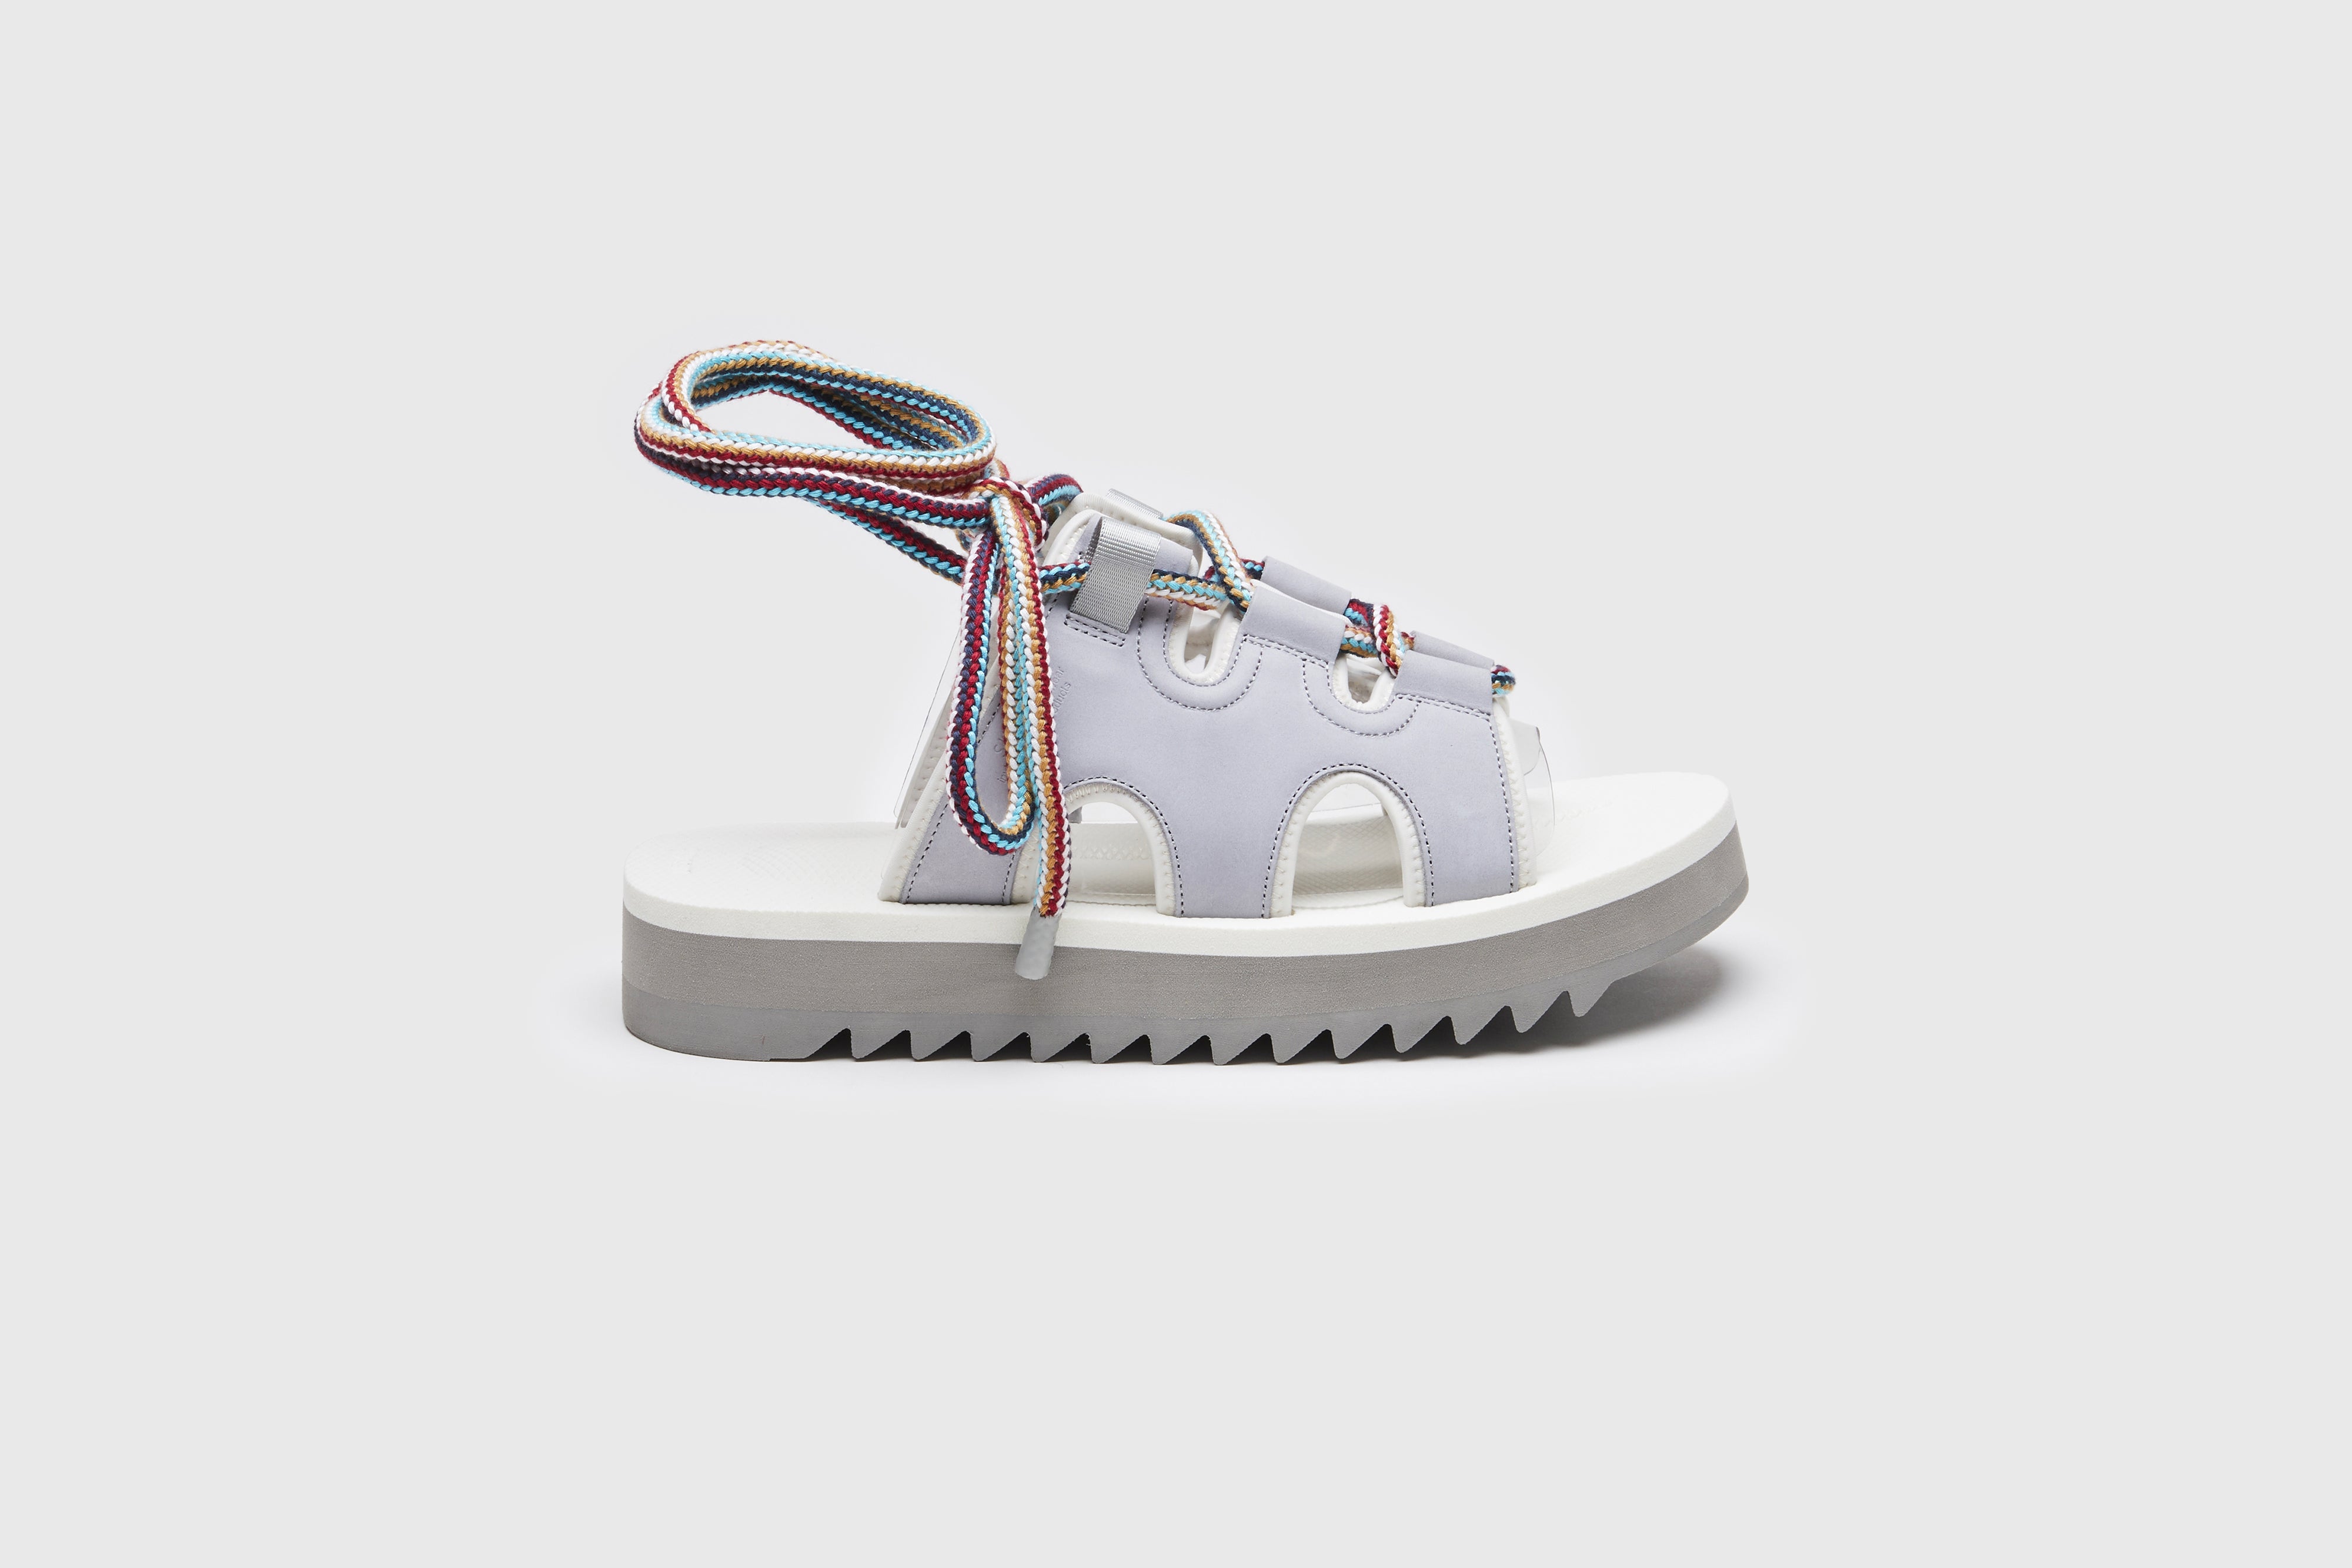 SUICOKE RAY-AB slides with gray x white nylon upper, gray x white midsole and sole, strap and logo patch. From Spring/Summer 2023 collection on eightywingold Web Store, an official partner of SUICOKE. OG-326AB GRAY X WHITE